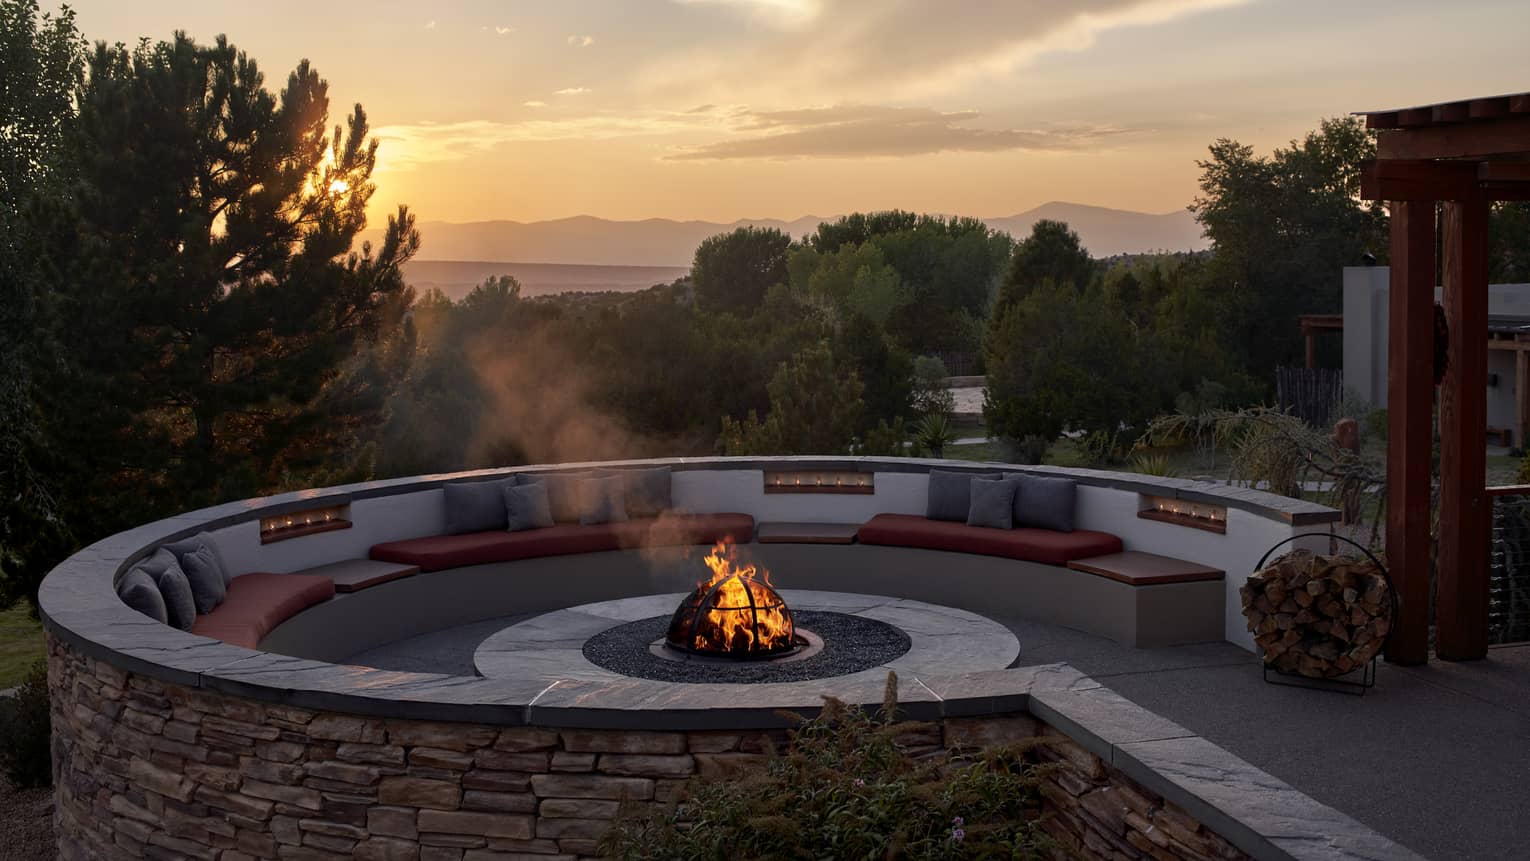 A firepit outside during a sunrise, surrounded by trees and plants.